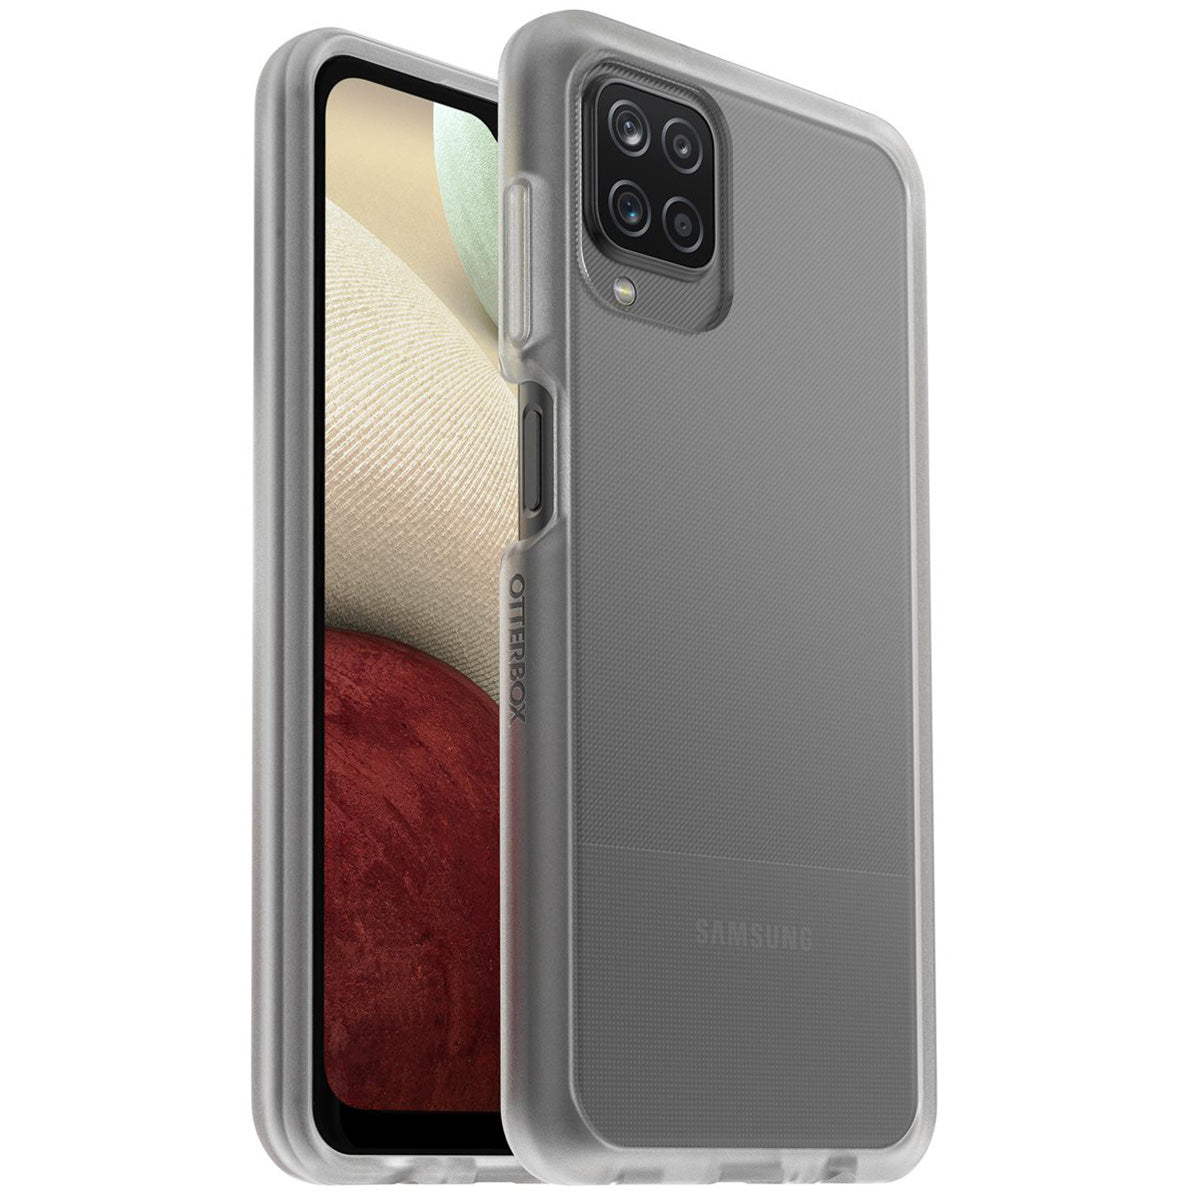 Samsung Galaxy A12 Cases, Covers &amp; Accessories